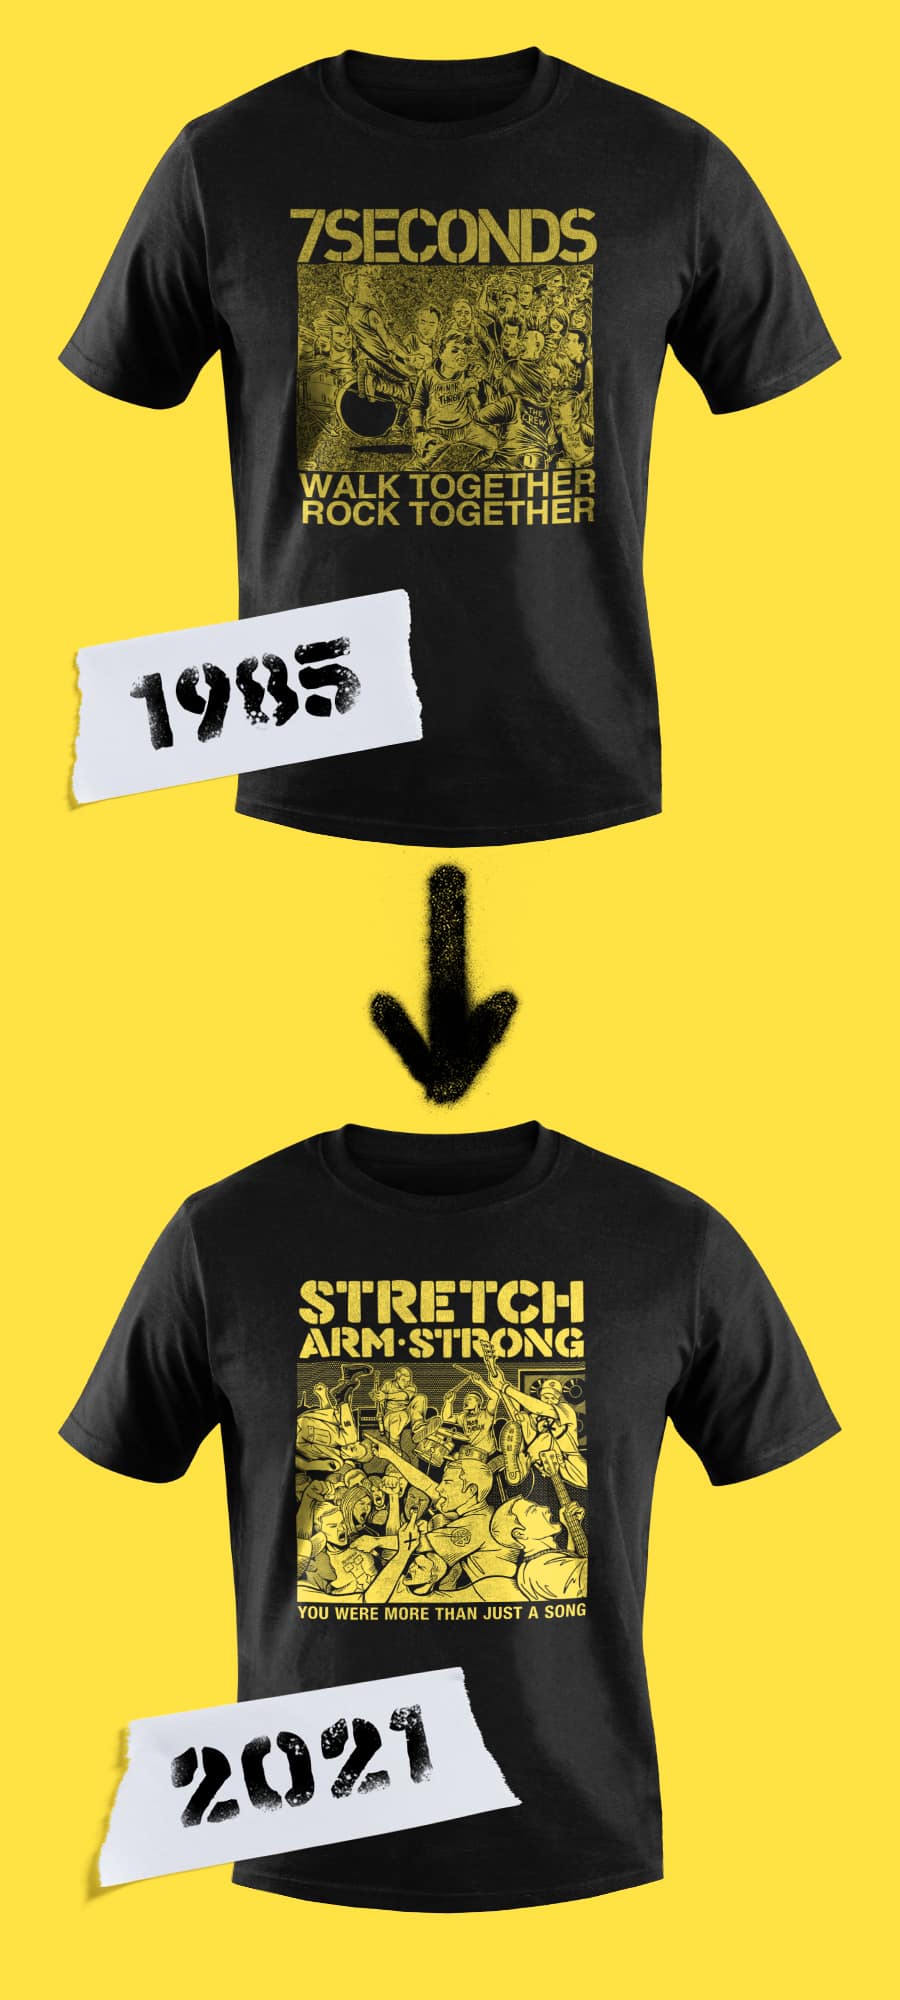 comparison of 1985 7 seconds tshirt and 2021 Stretch Arm Strong shirt